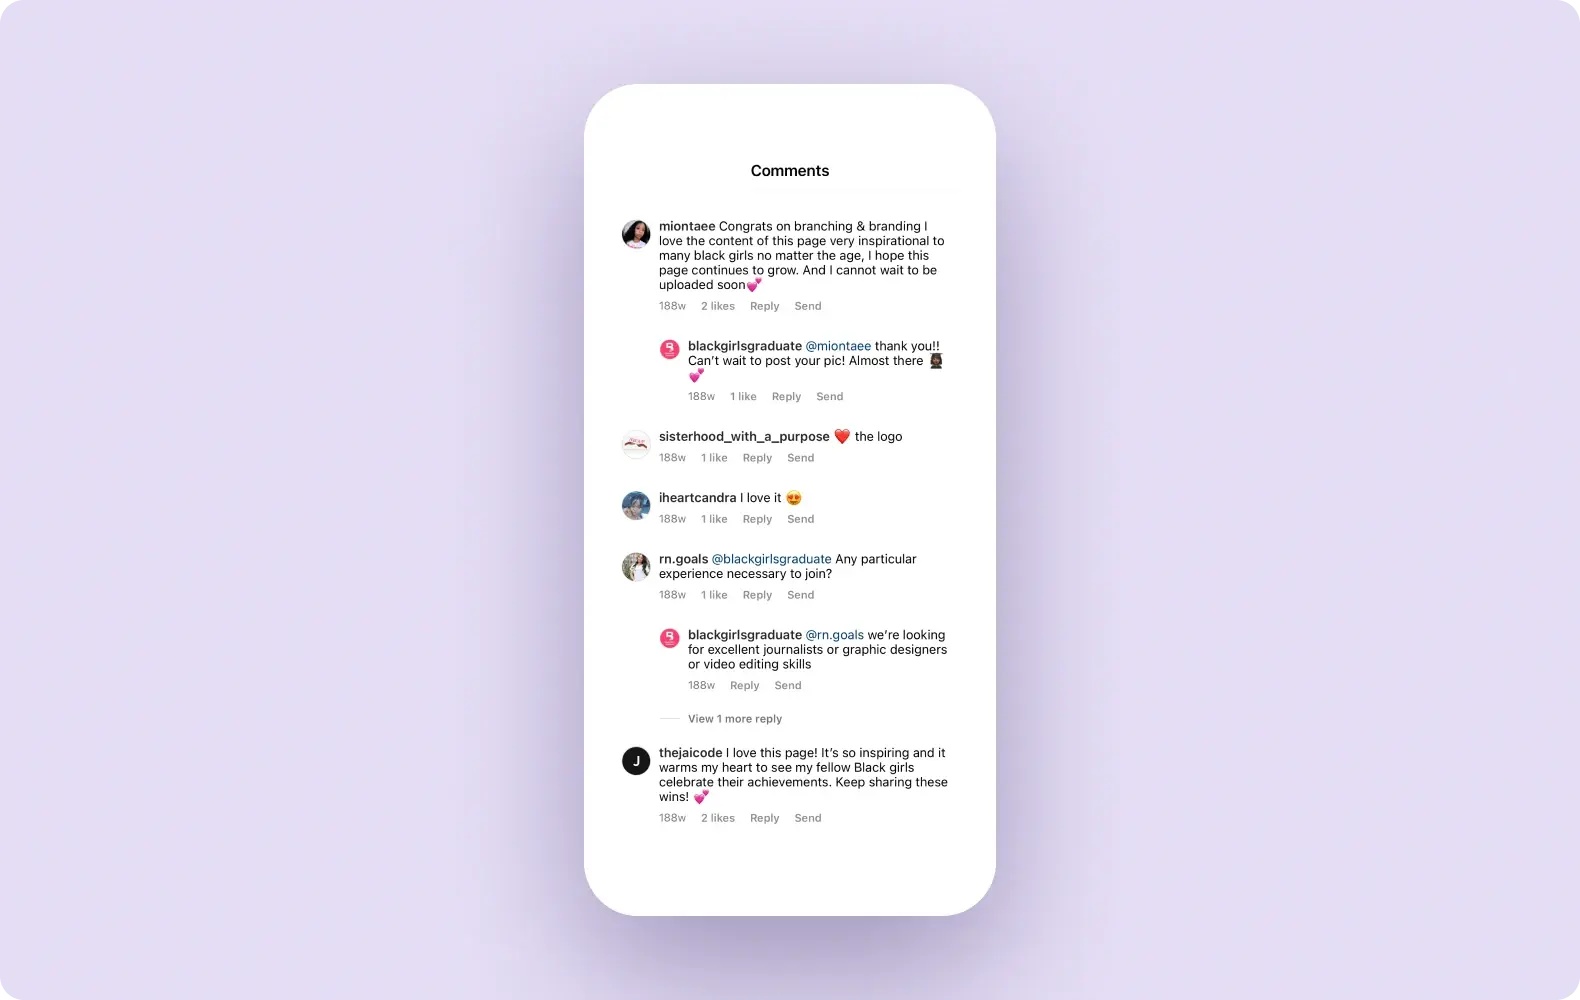 Image of comments and replies for an Instagram post.